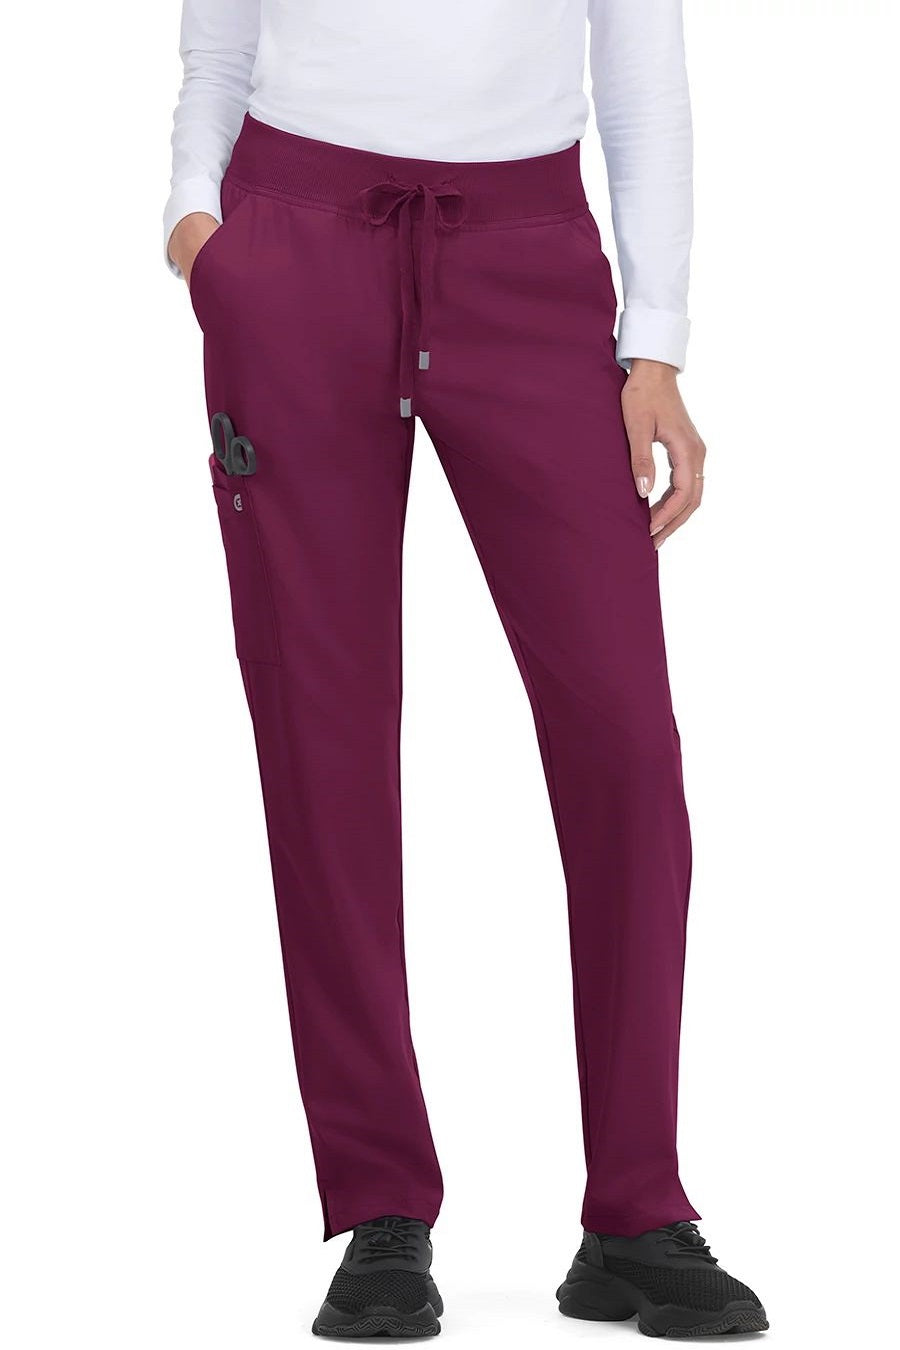 koi Scrub Pants Cureology Atria in Wine at Parker's Clothing and Shoes.